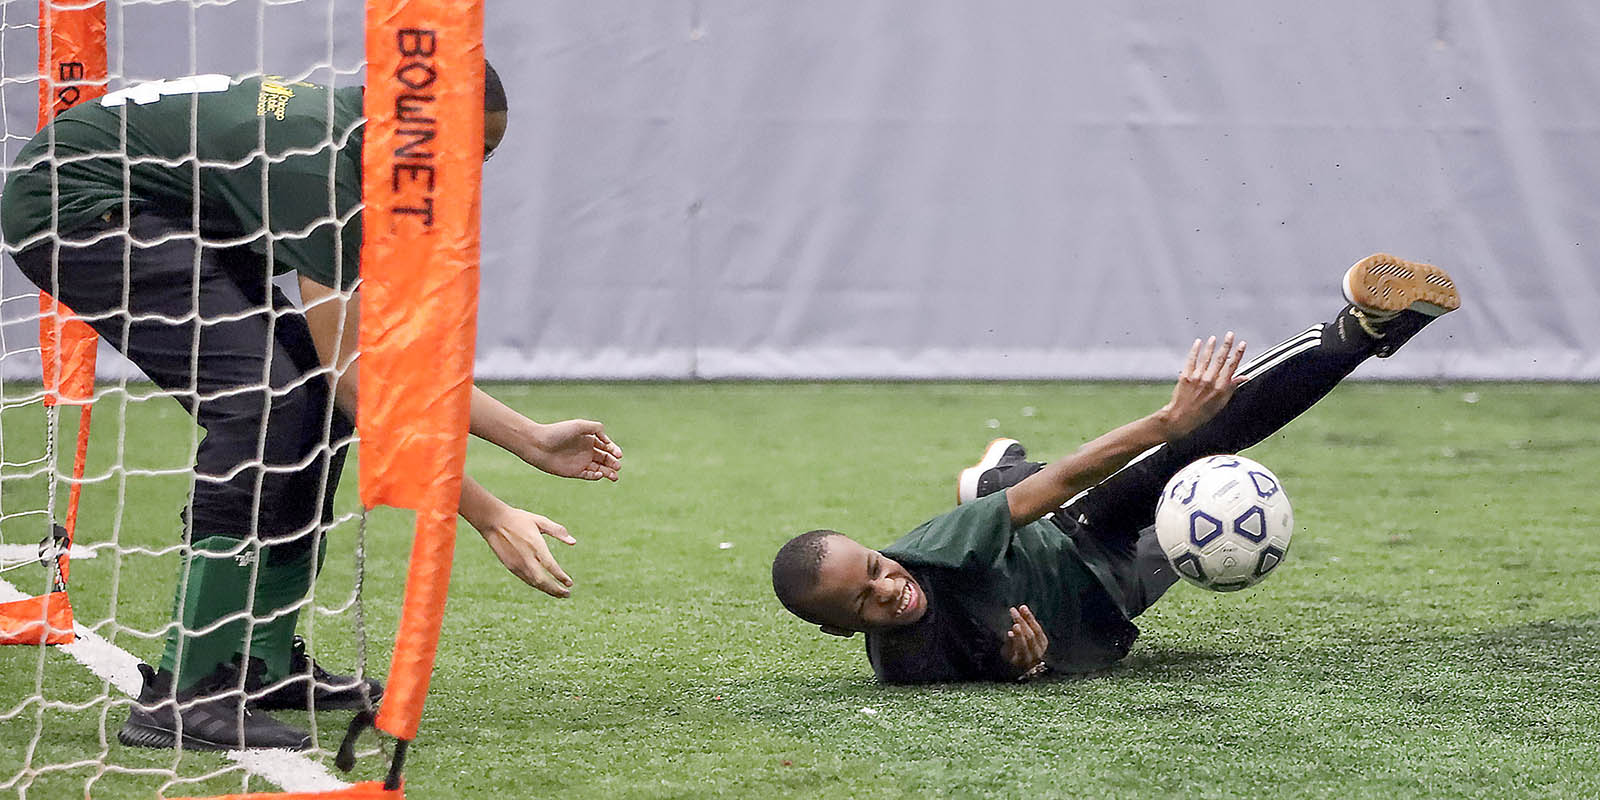 A Special Olympics athlete dives towards the soccer ball while the goalie waits behind him